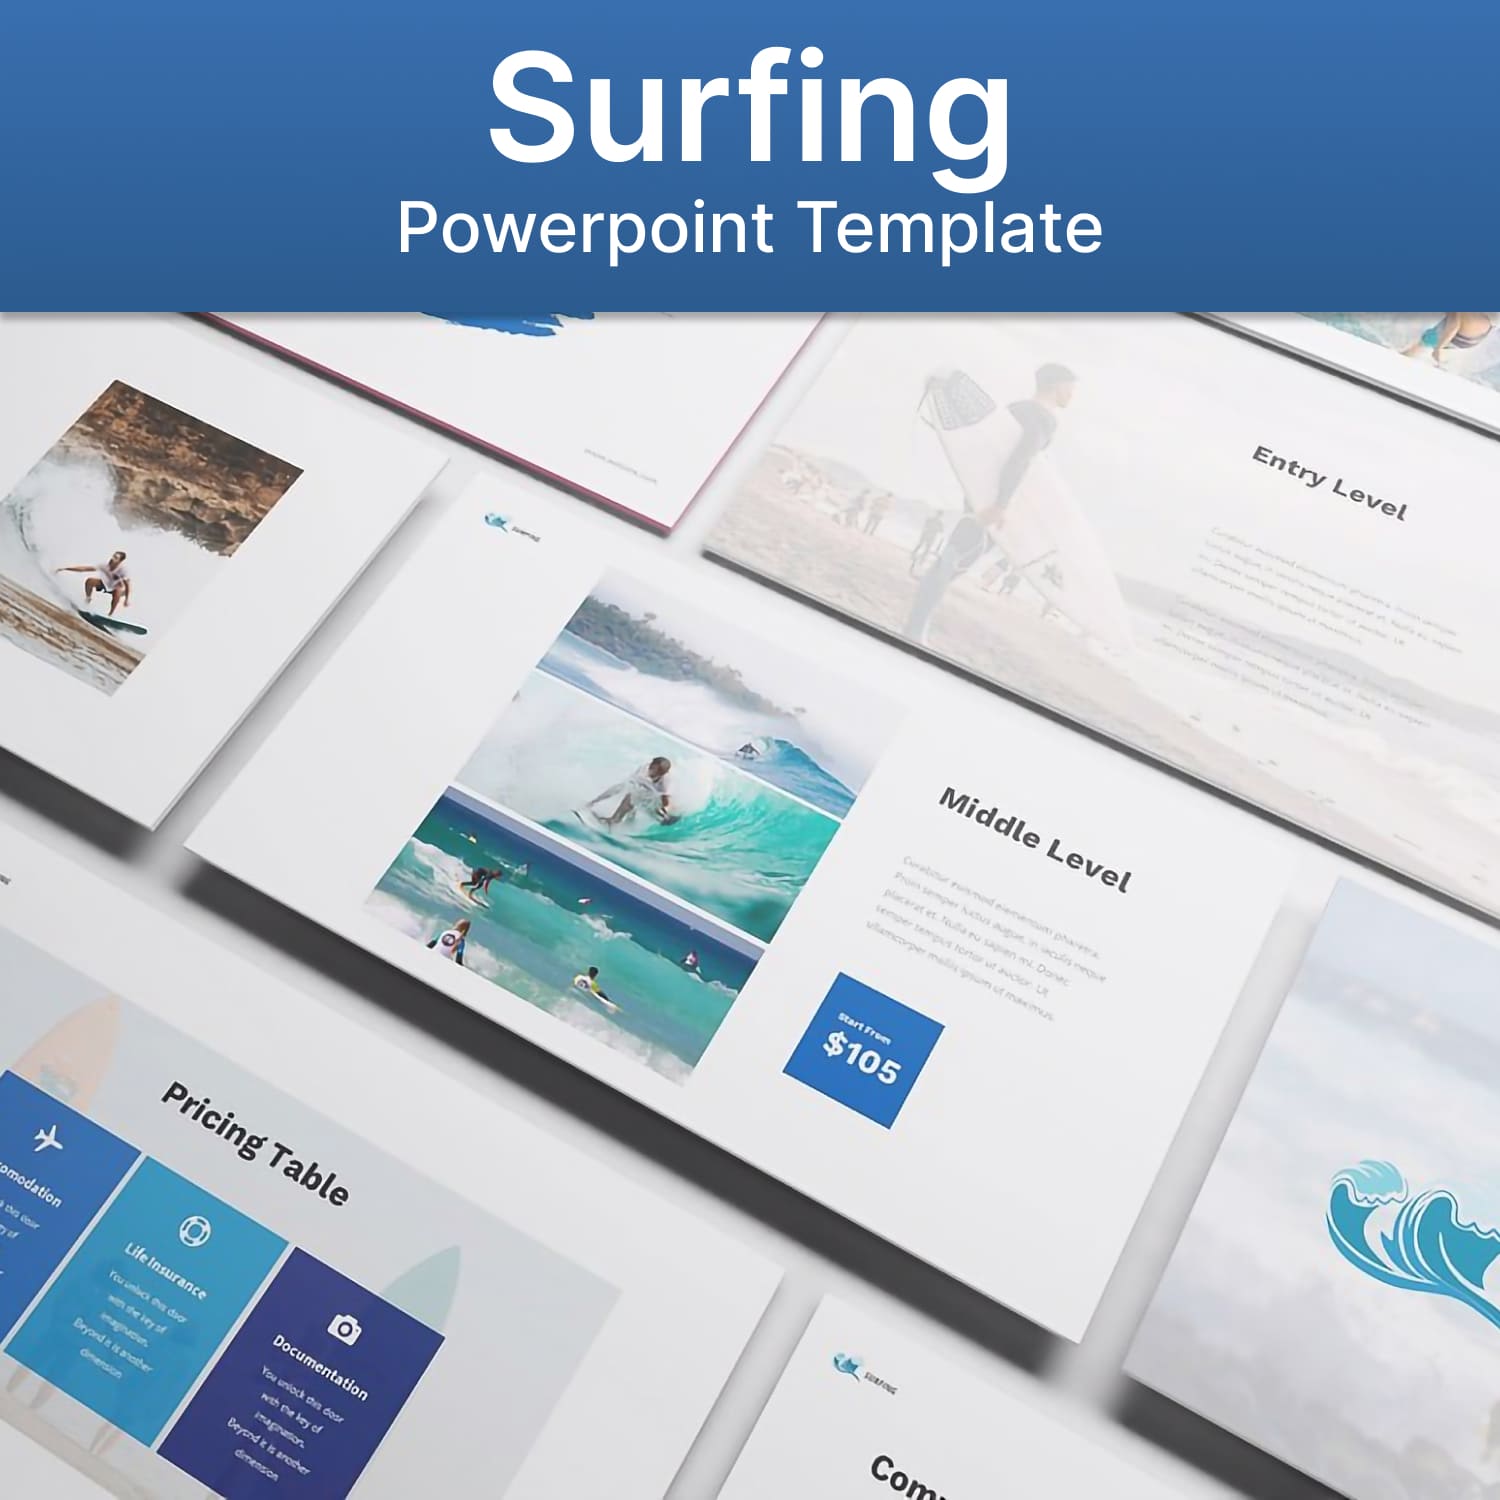 Surfing Powerpoint Template.